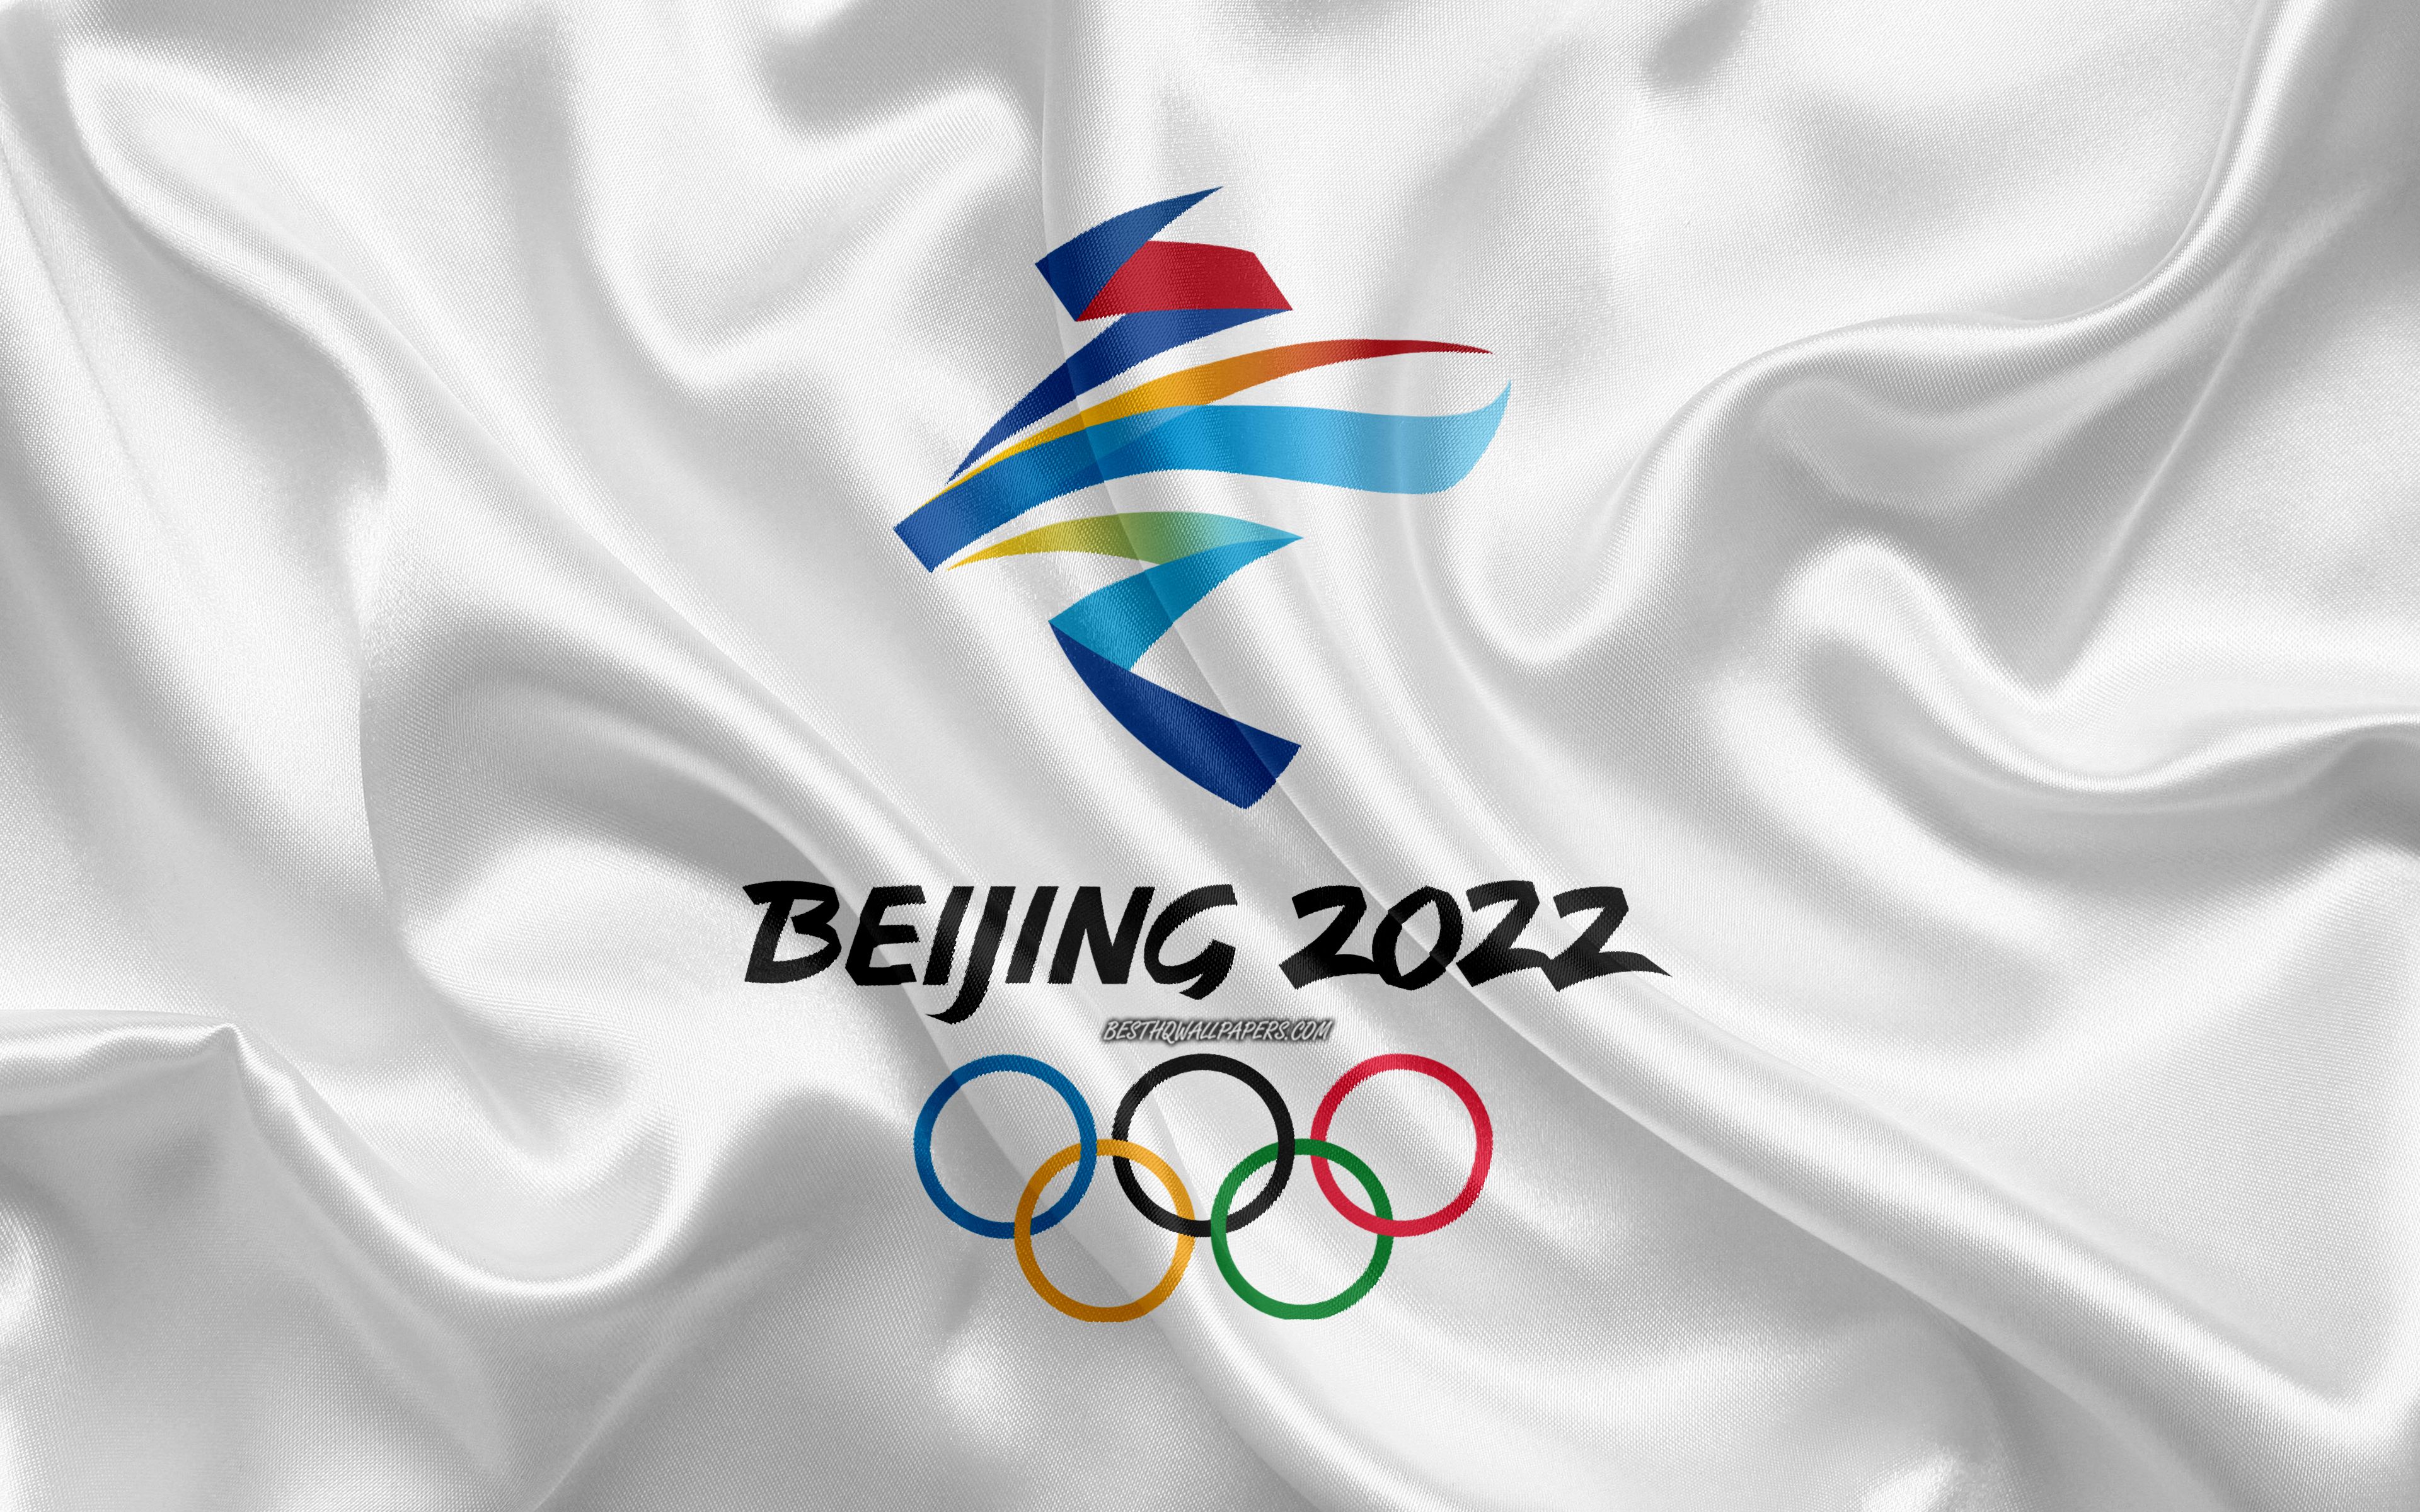 Download wallpaper 2022 Winter Olympics, logo, 4k, silk flag, Beijing 2022 logo, XXIV Olympic Winter Games, Beijing, China, silk texture for desktop with resolution 3840x2400. High Quality HD picture wallpaper